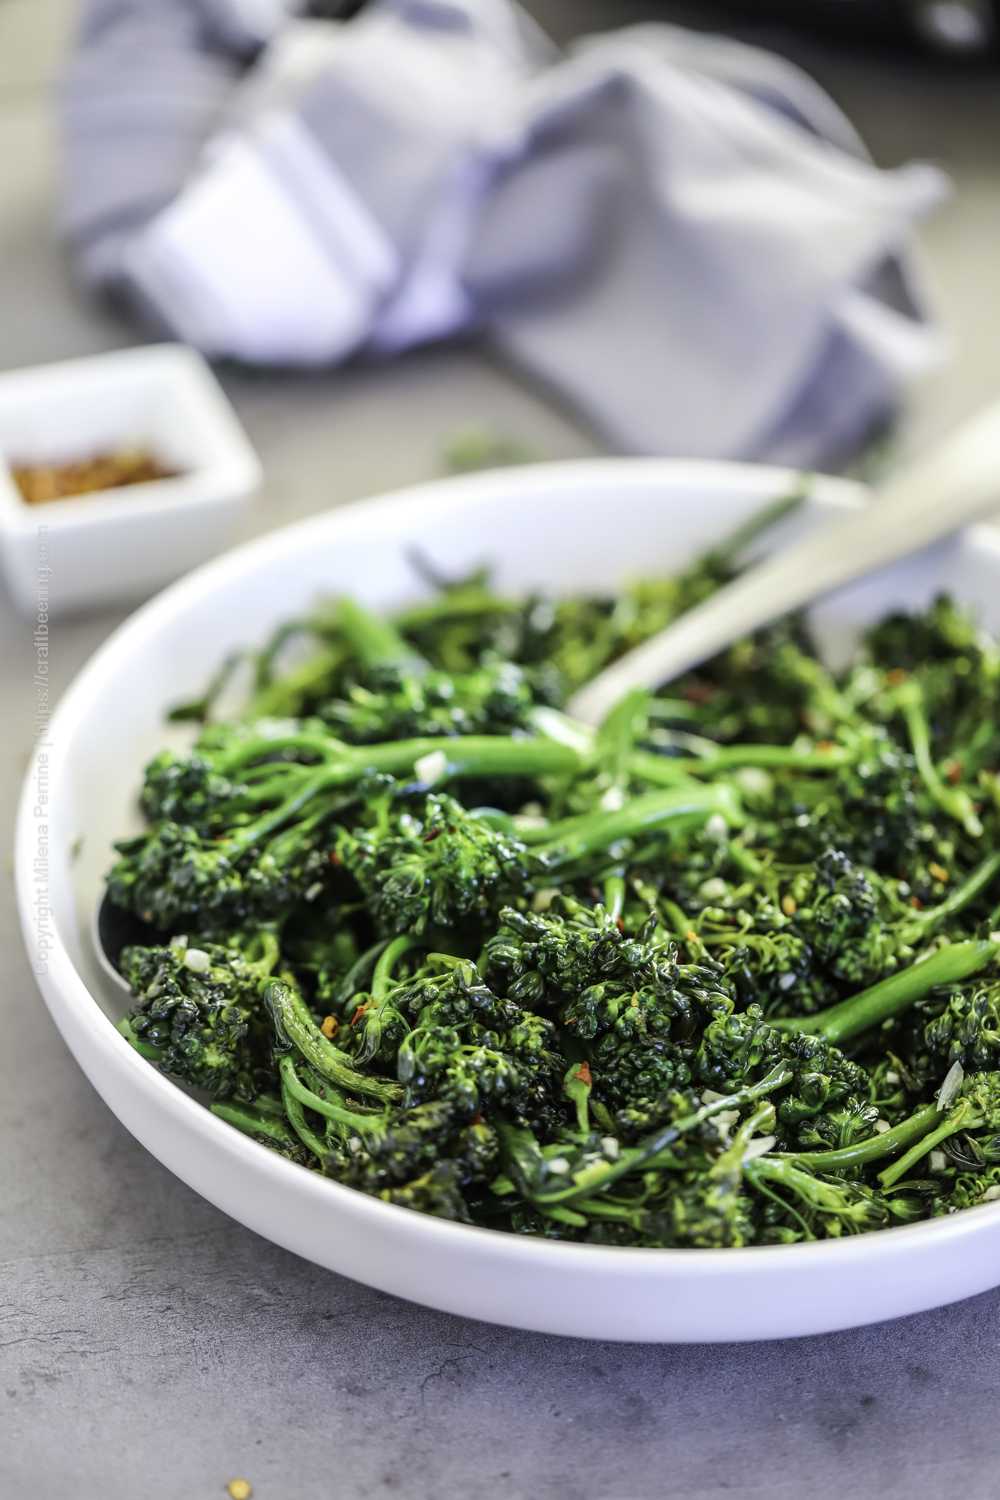 Broccolini cooked with garlic presented as a side to share. 